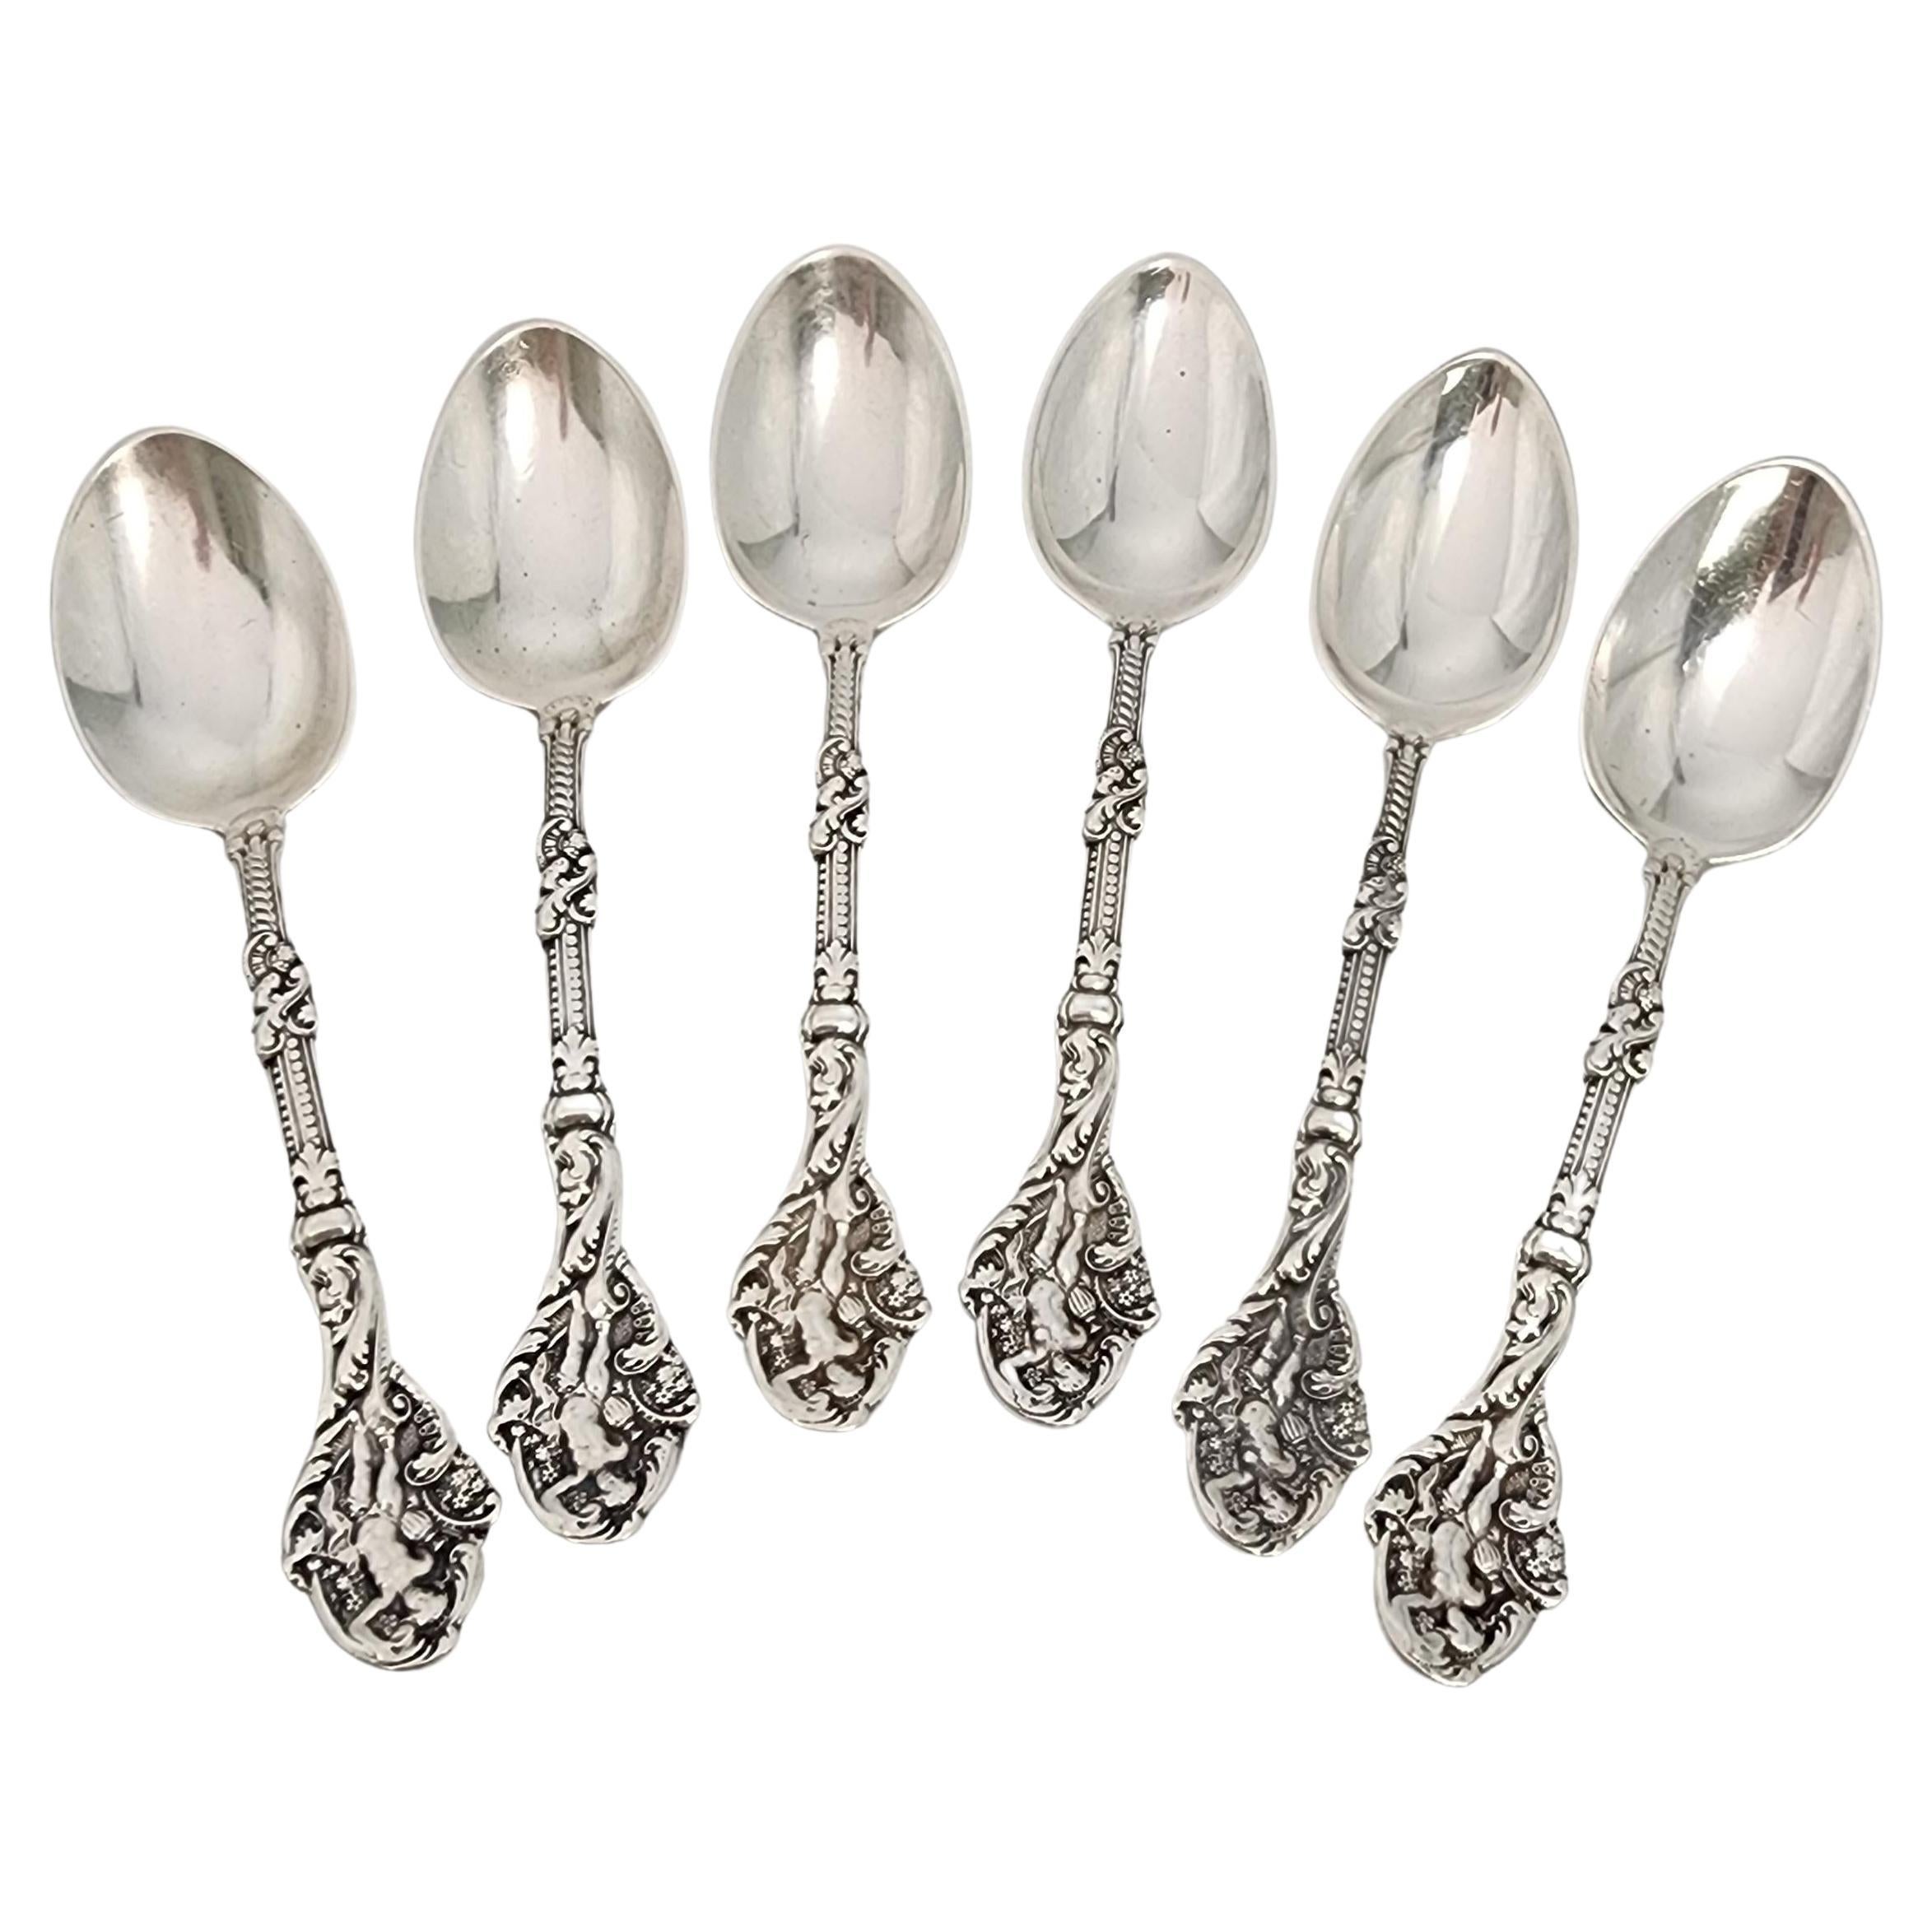 Set of 6 Gorham Versailles Sterling Silver Demitasse Spoons 4 3/8" w/Mono #17138 For Sale